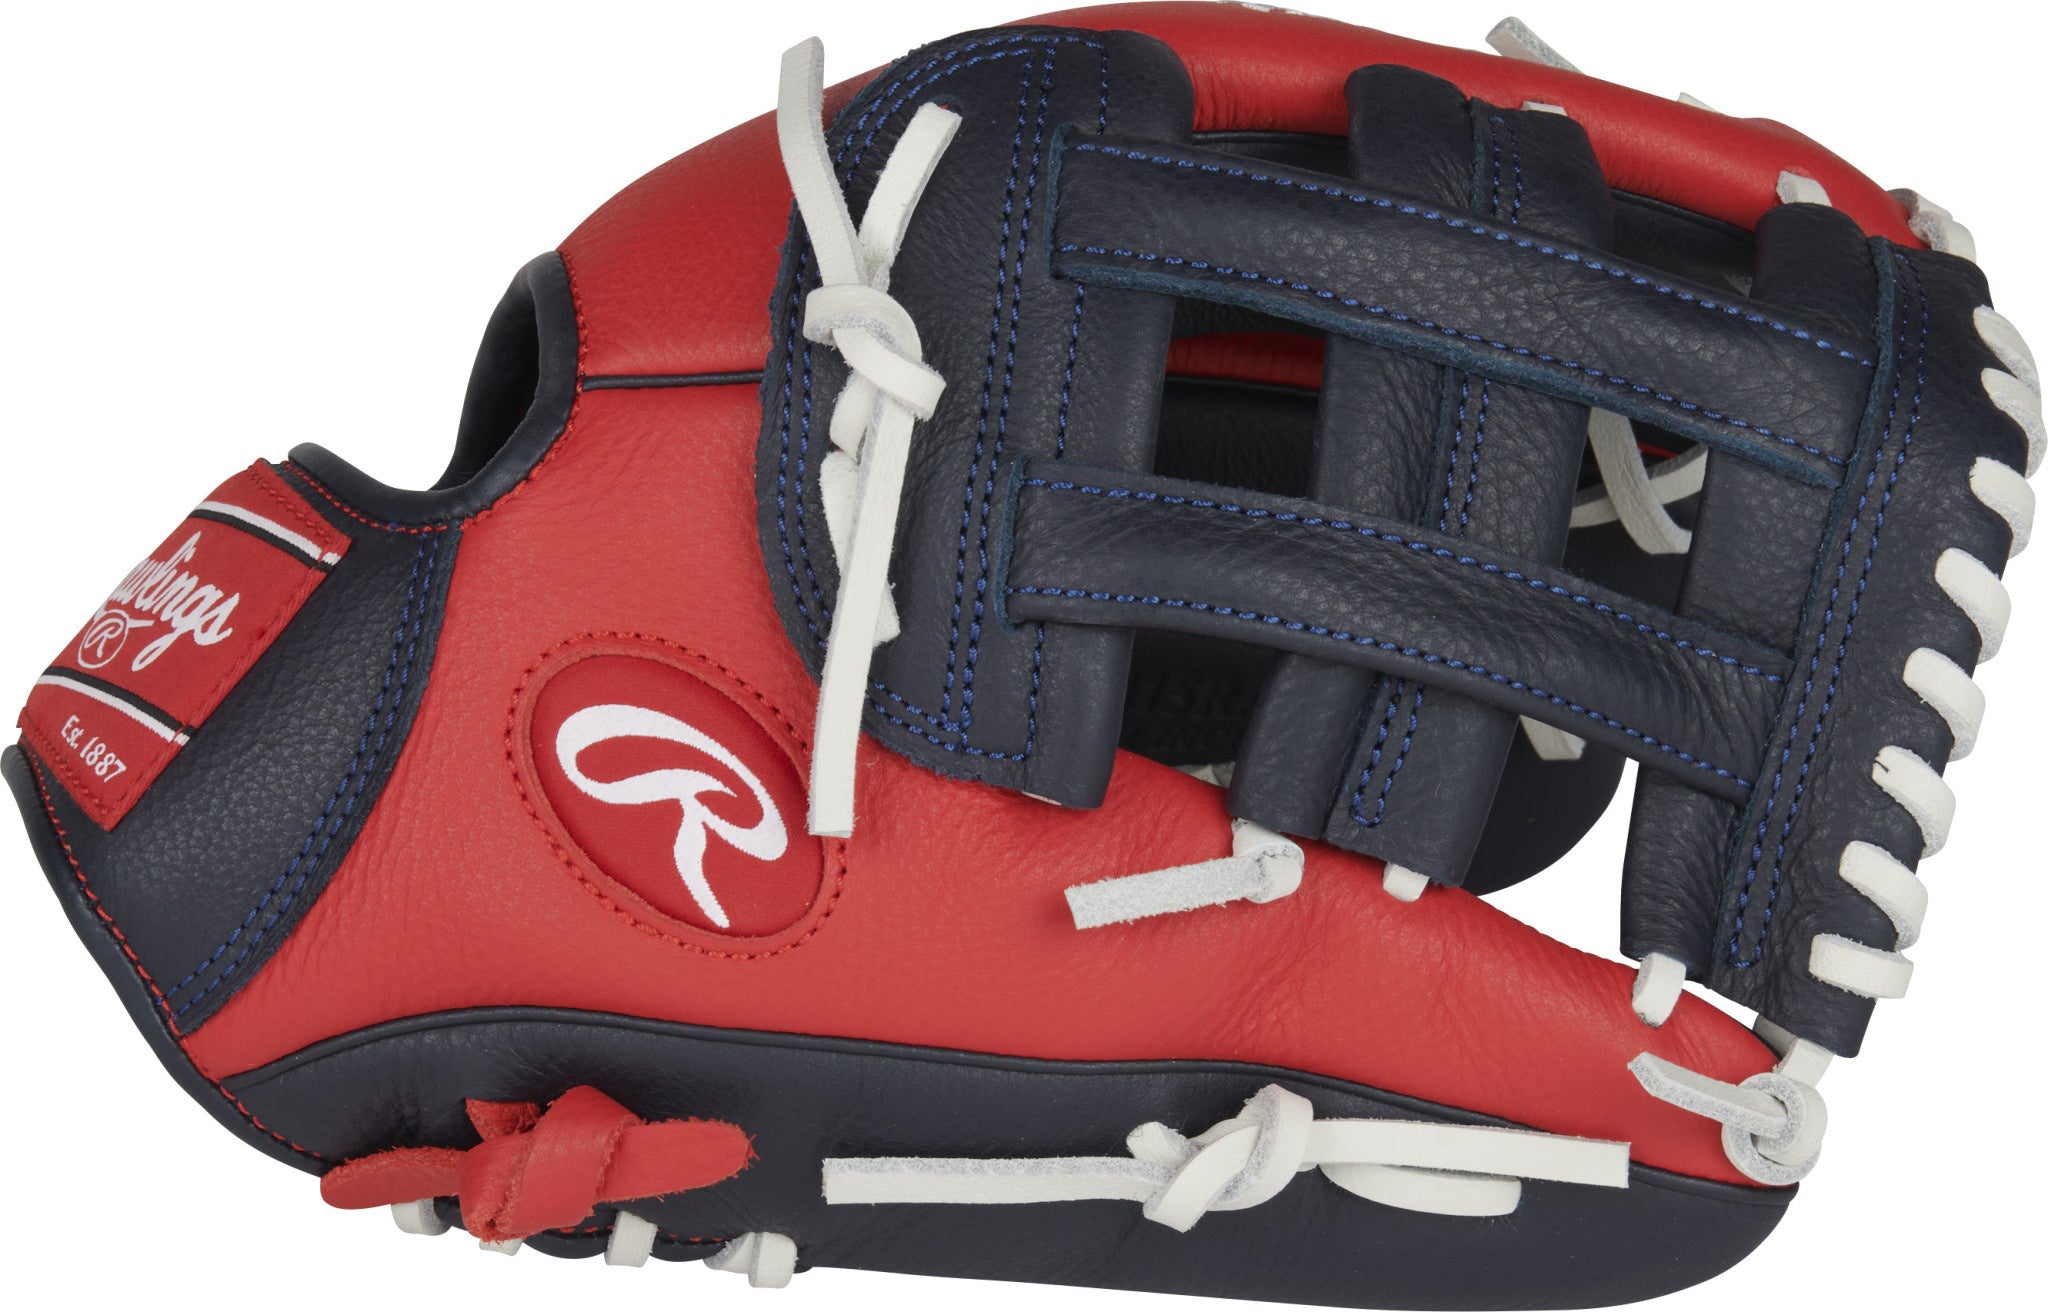 Rawlings Select Youth R. Acuna Jr. GD 11 1/2